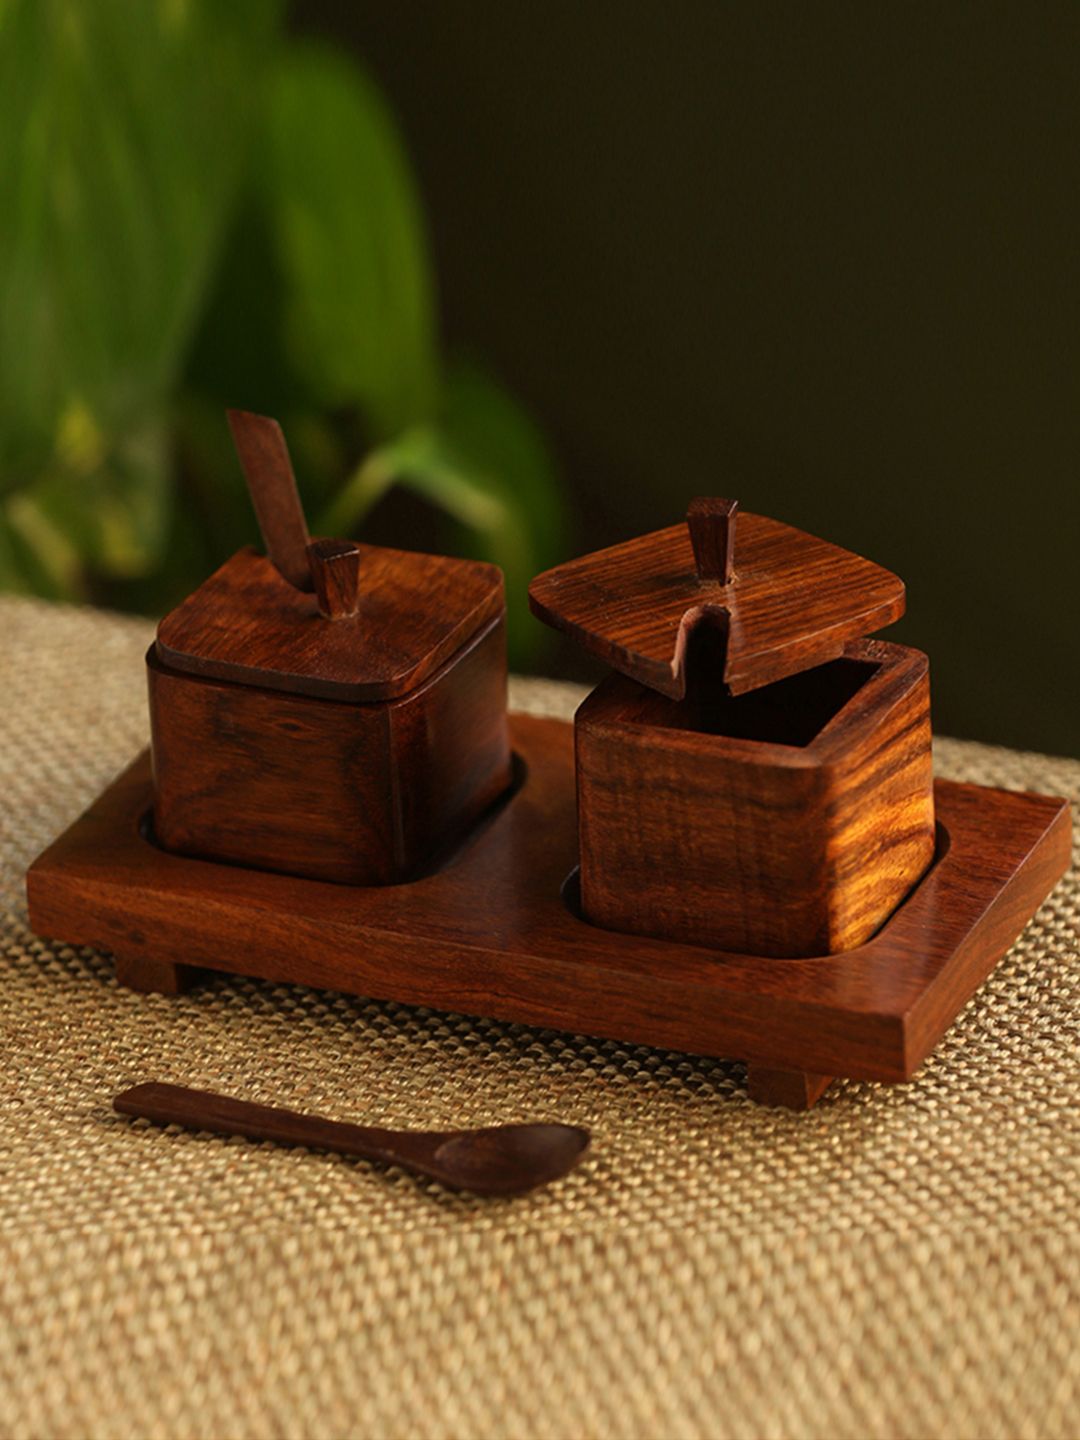 ExclusiveLane Wood Serving Squares Handcrafted Wooden Refreshment Jars With Spoon And Tray Price in India